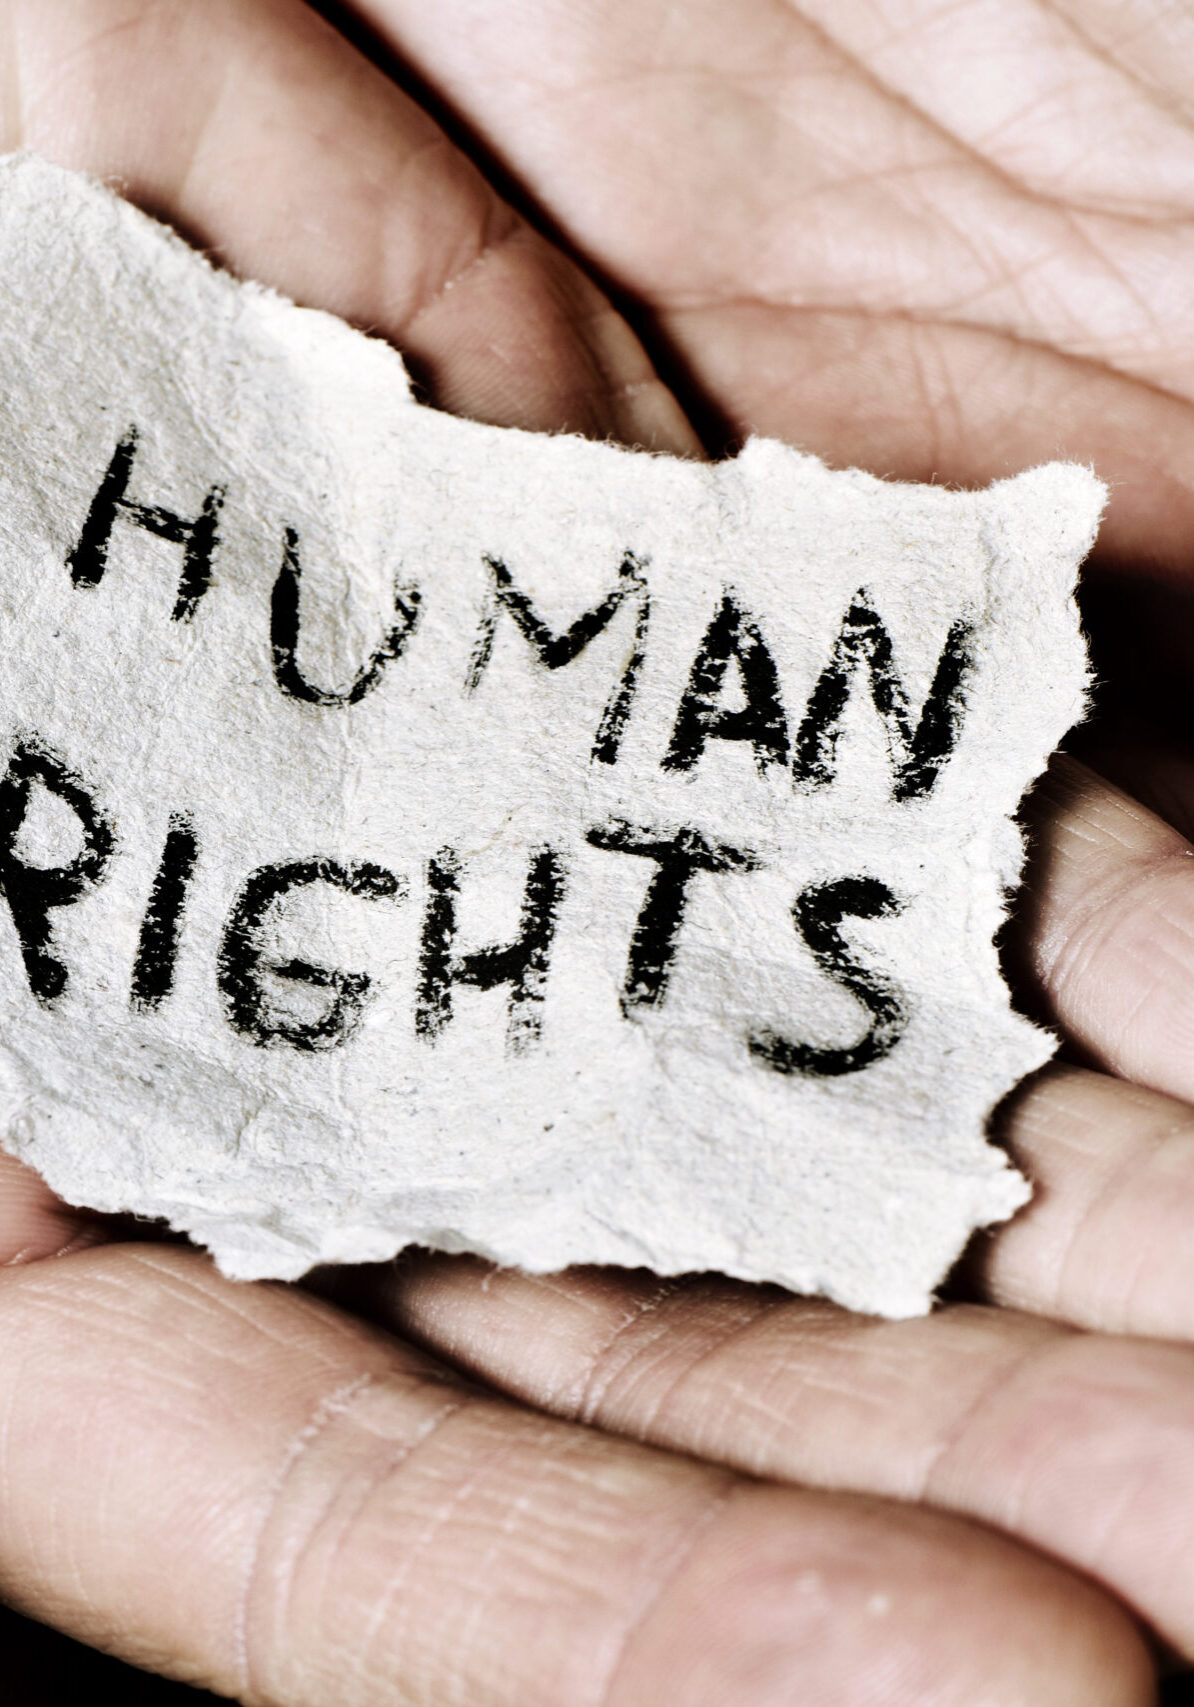 Ensuring businesses have the correct policies and procedures in place to identify and prevent human rights issues